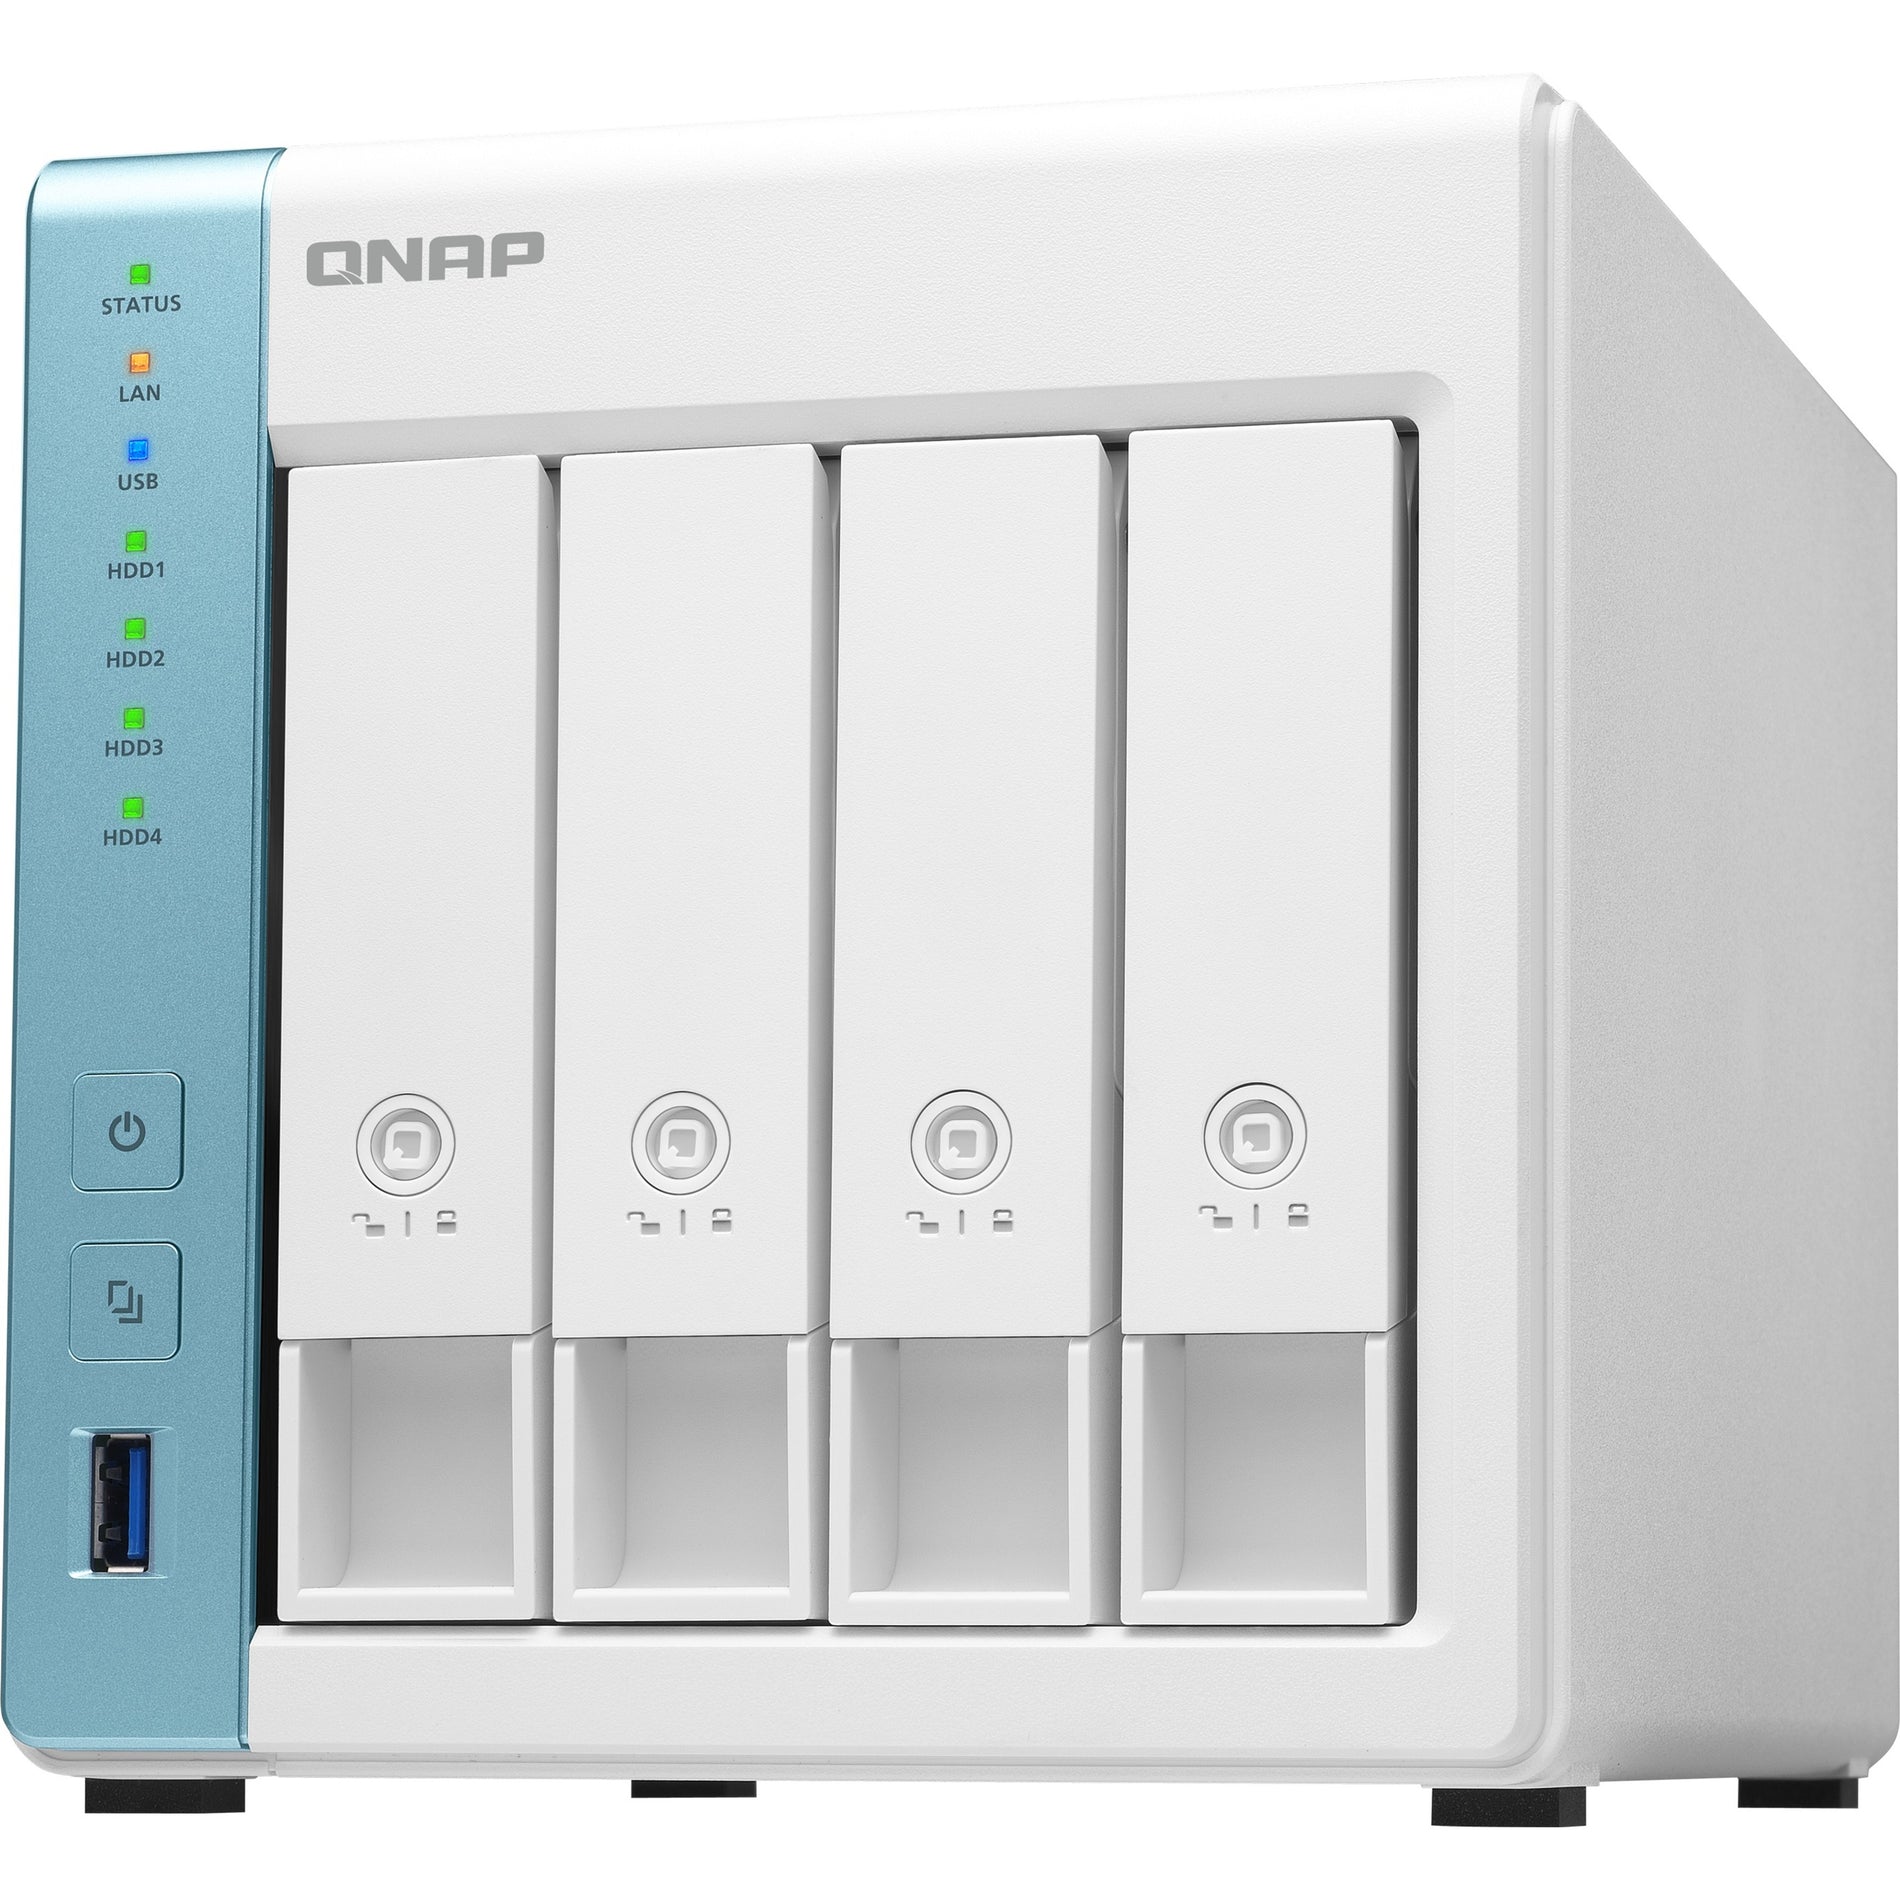 QNAP TS-431P3-4G-US Quad-core 1.7GHz NAS with 2.5GbE and Feature-rich Applications for Home & Office